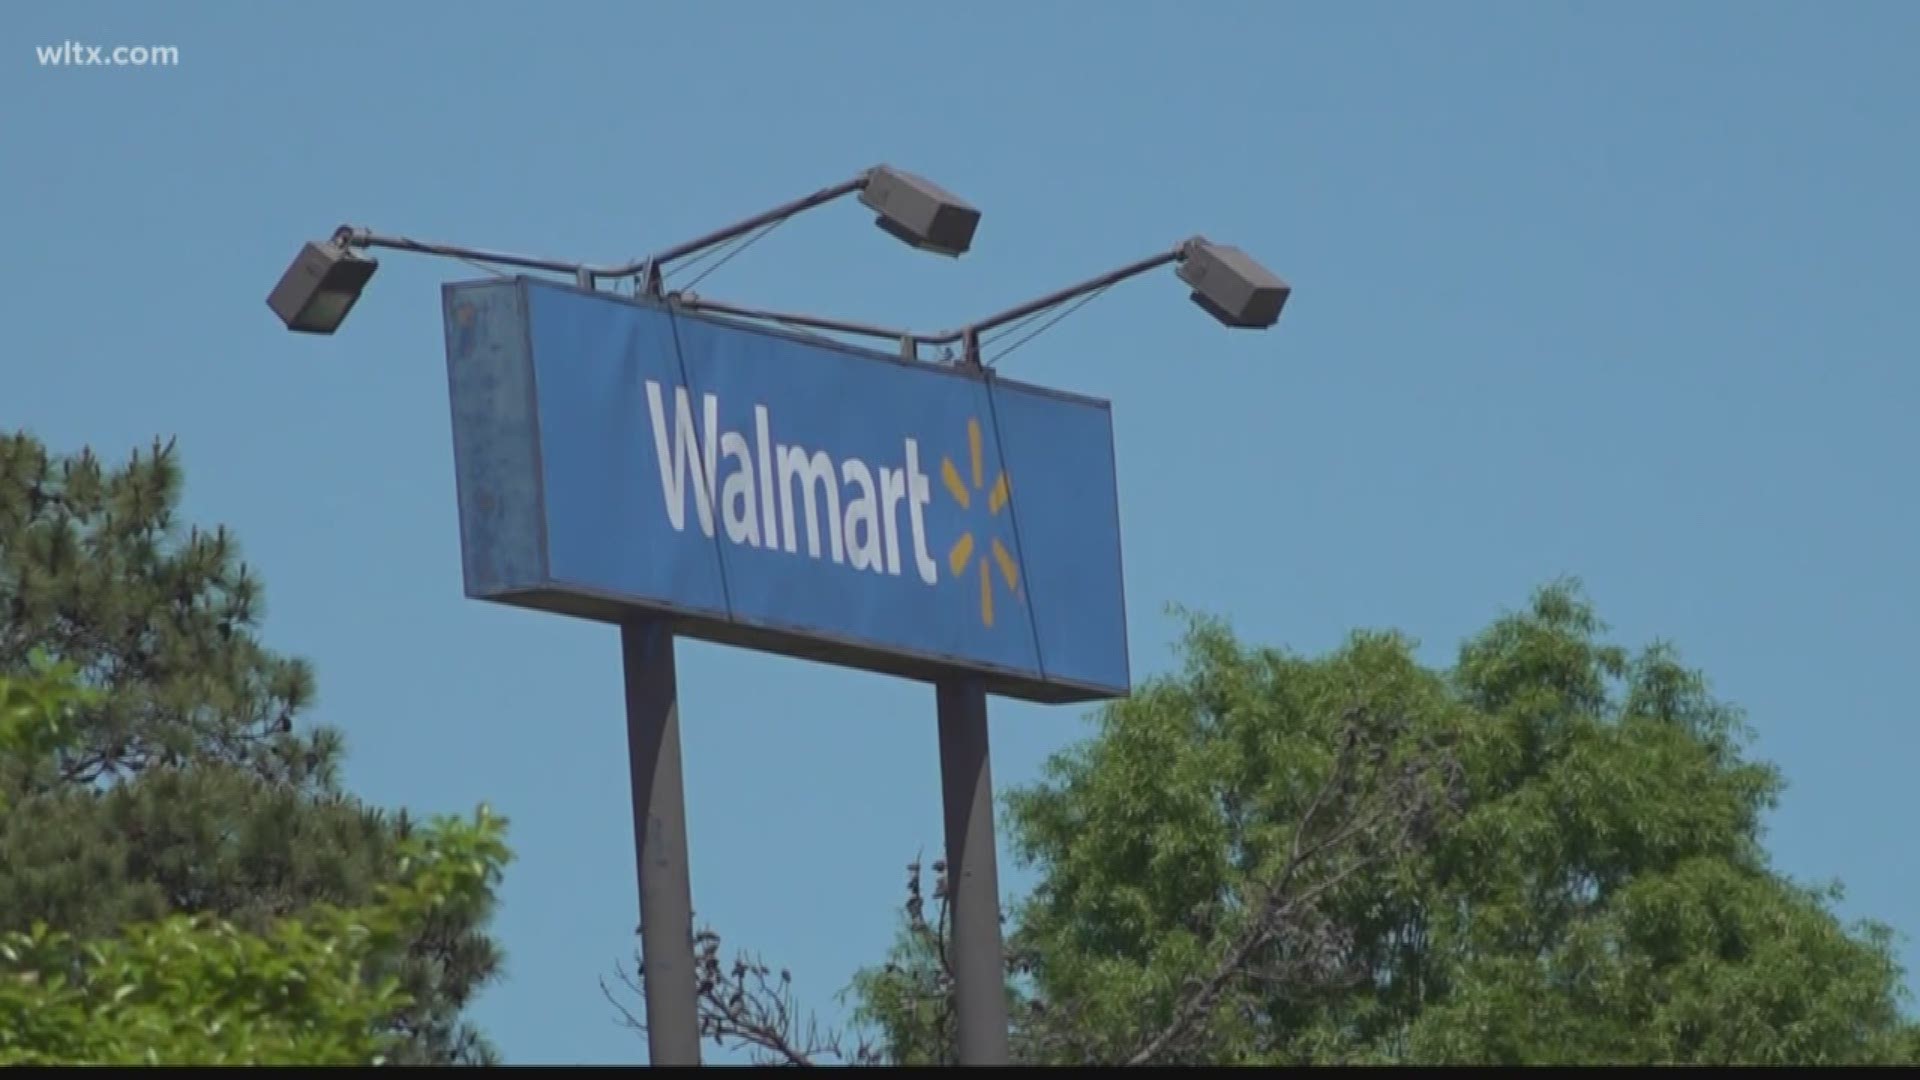 The Walmart on Harbison Boulevard is now back open after a fire damaged part of the store.